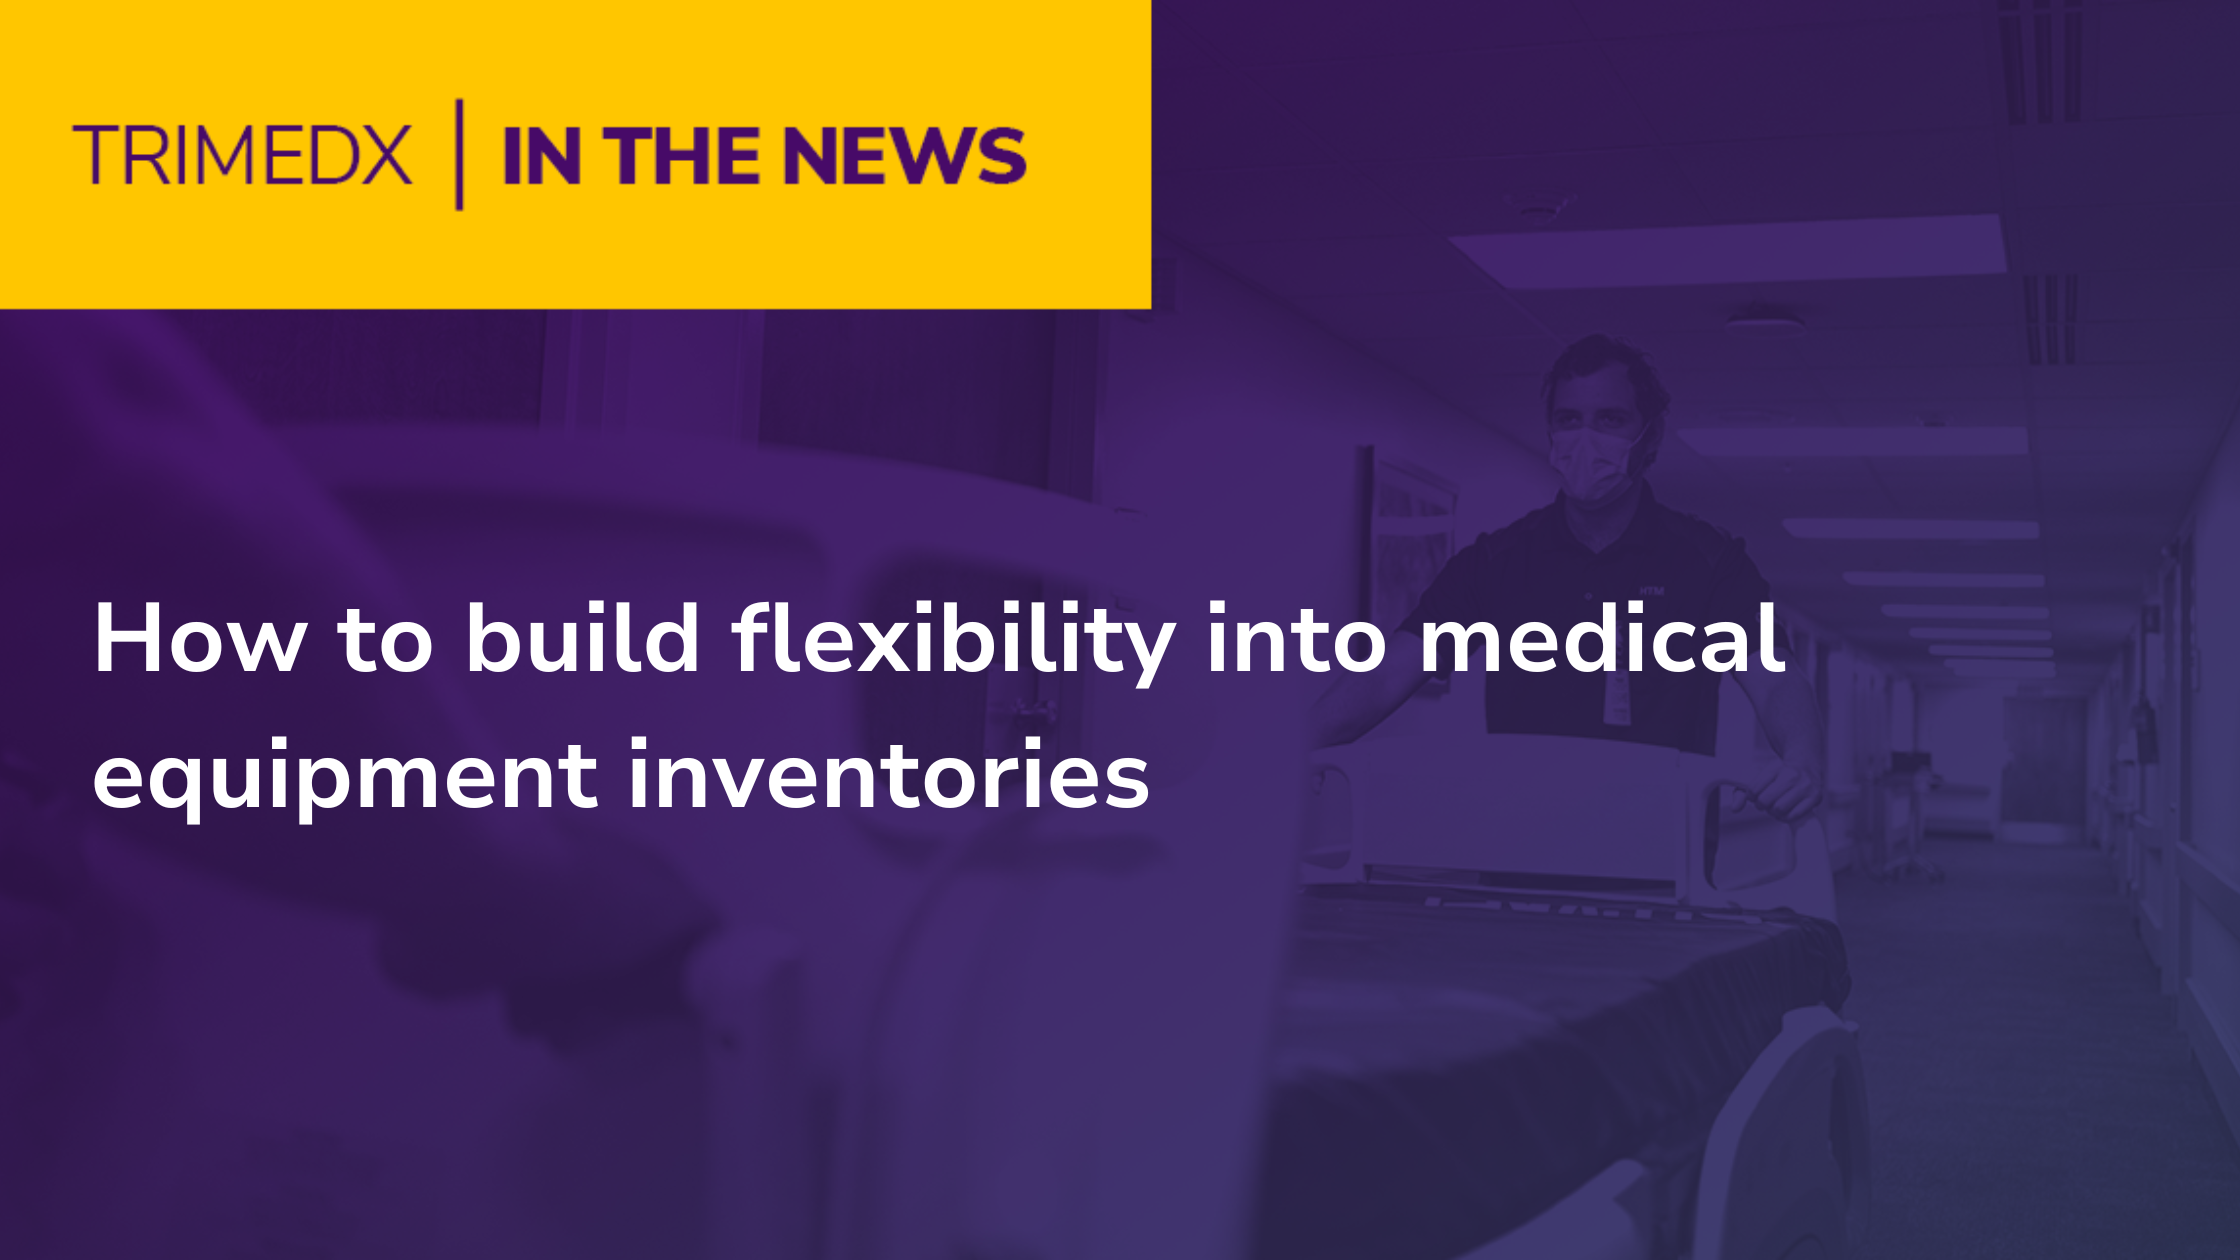 TRIMEDX in the News: How to build flexibility into medical equipment inventories 